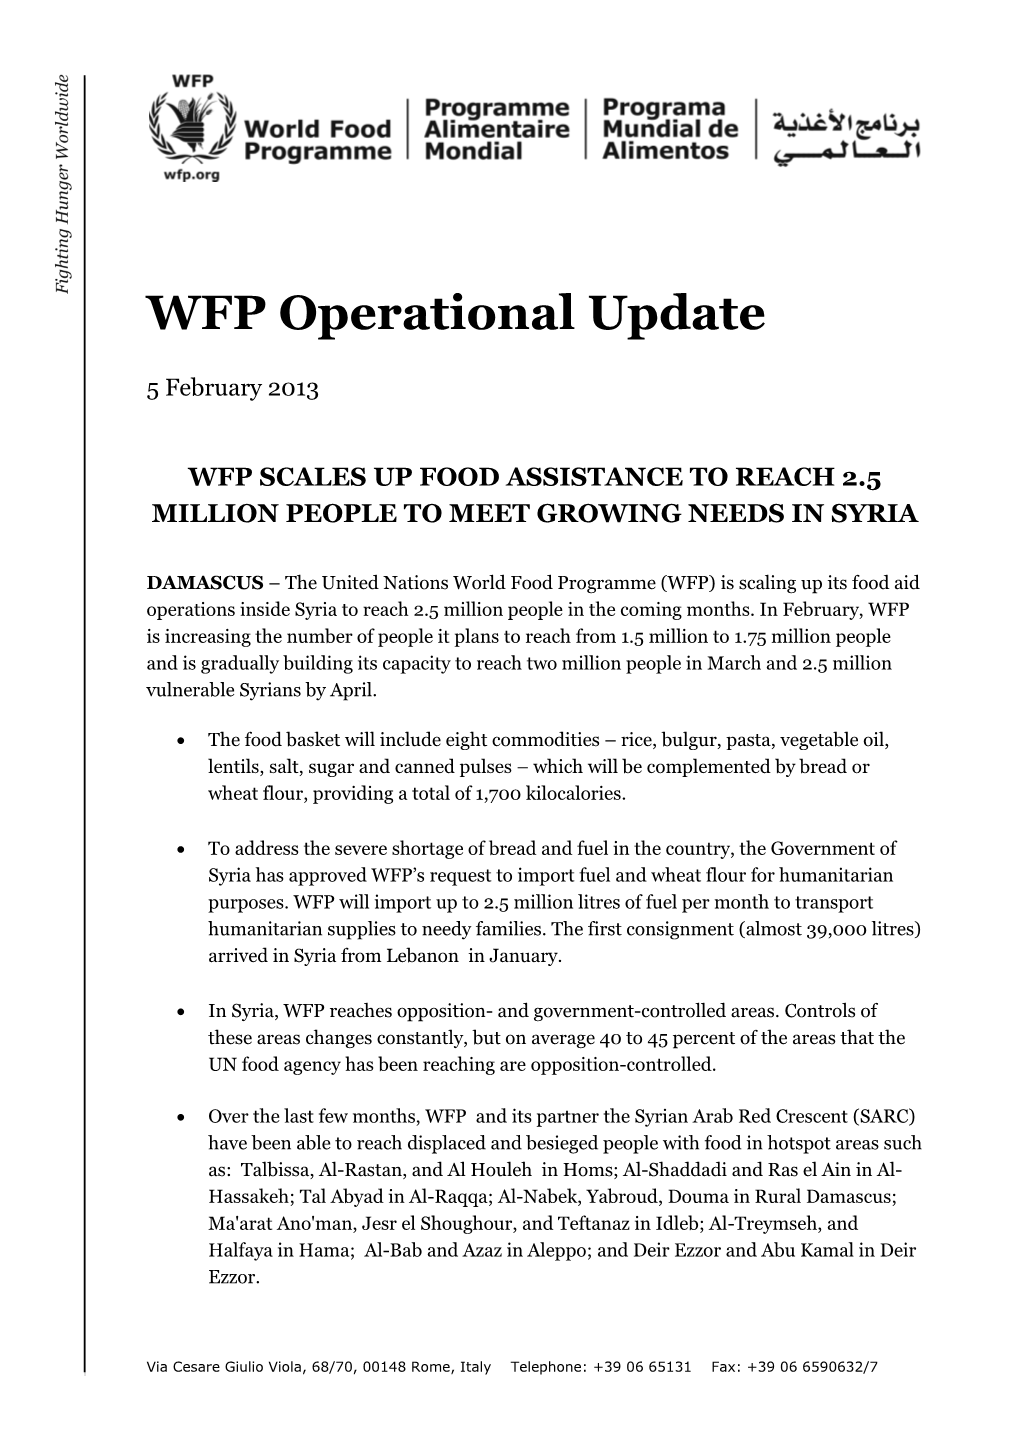 WFP News Release